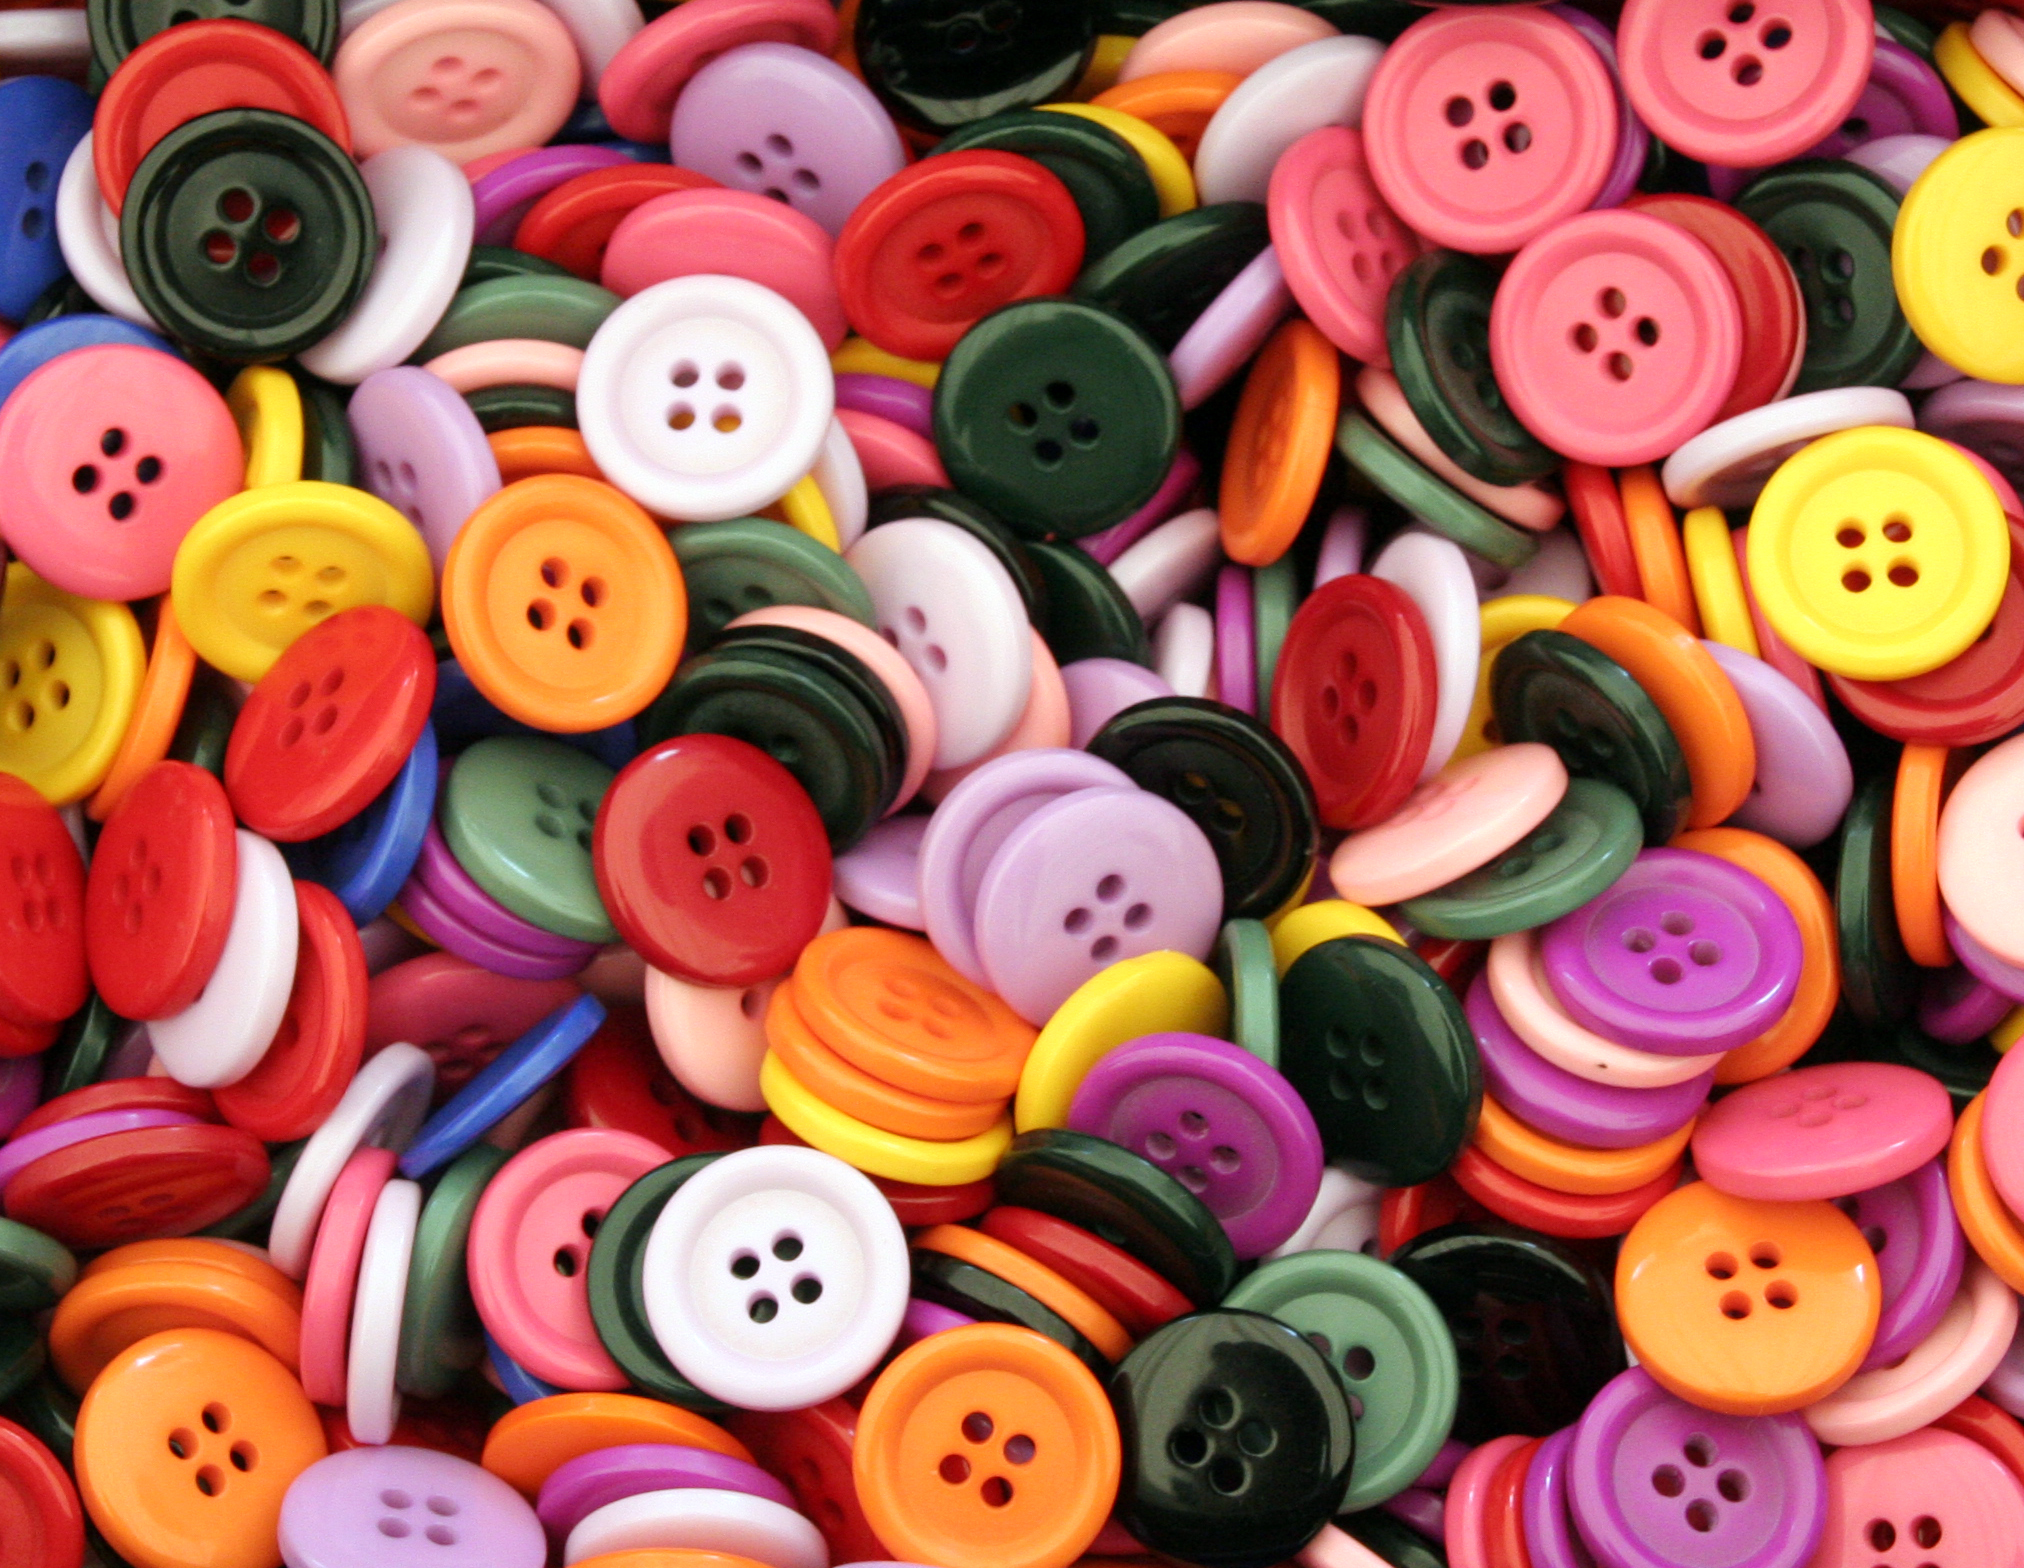 Pile of Buttons